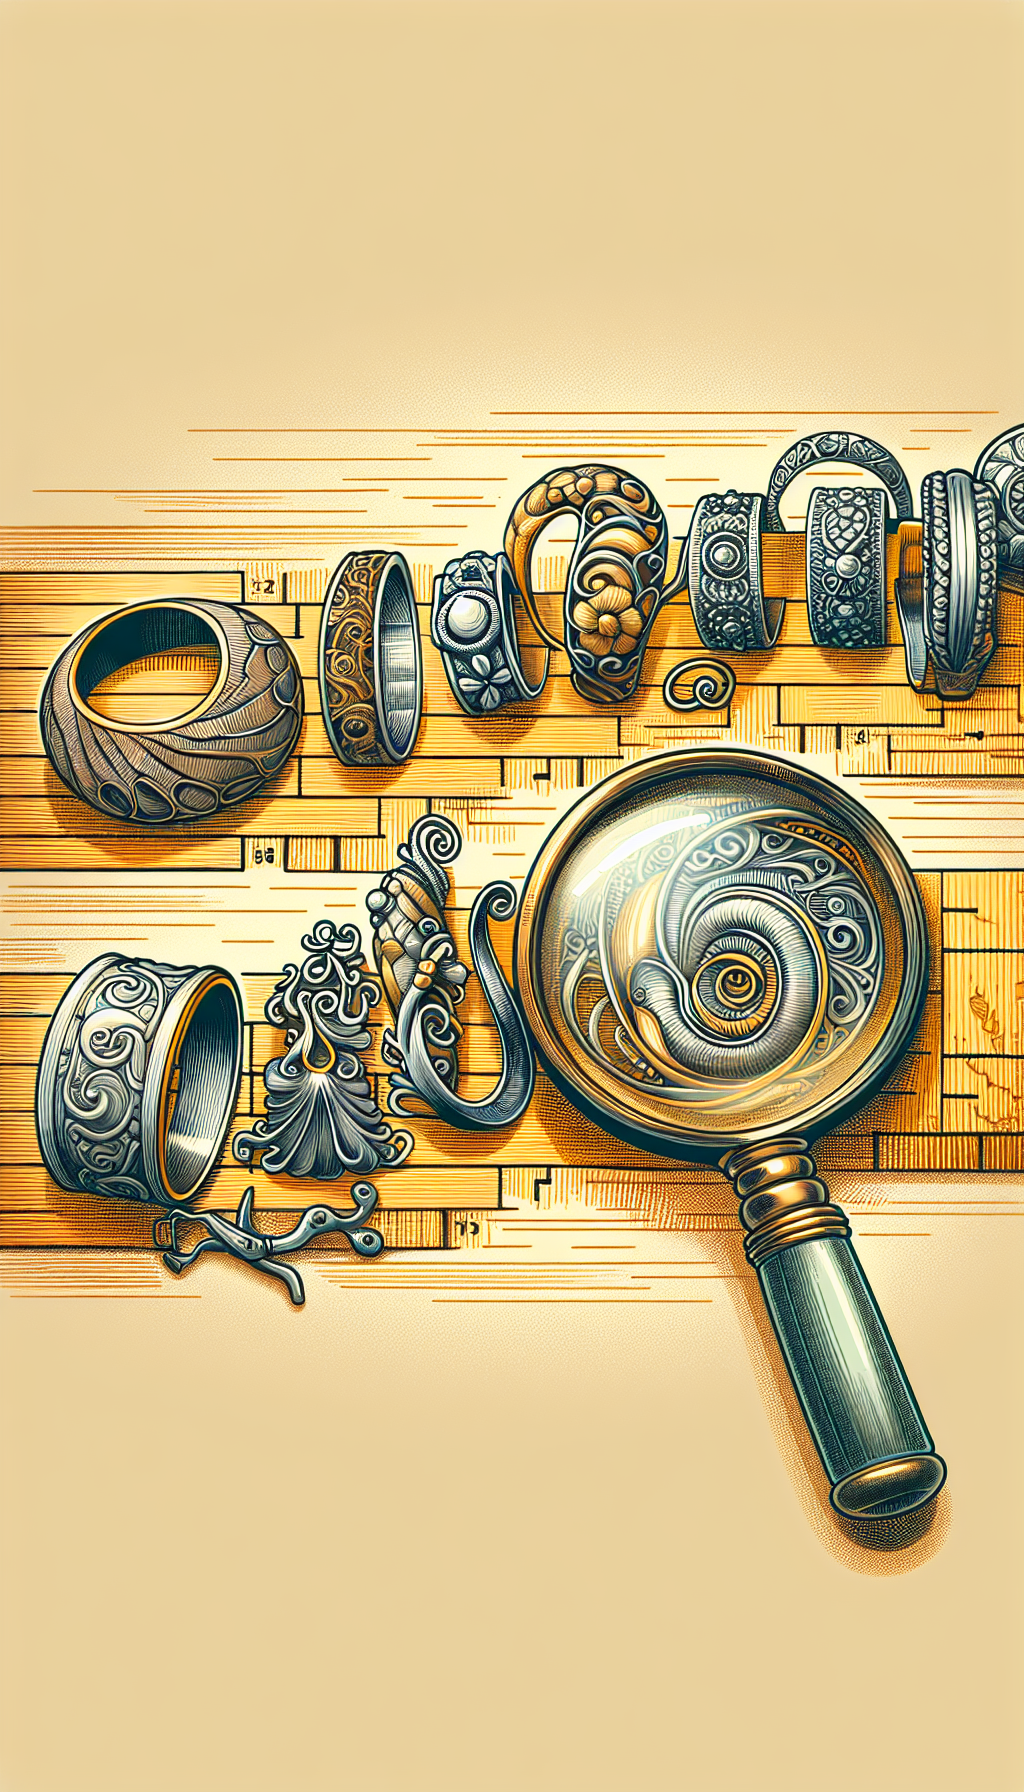 An illustrated timeline unfurls as a metallic tape measure, with distinct eras marked by iconic jewelry pieces made of era-specific alloys, morphing between styles like art nouveau curls for ancient times to sleek art deco lines for modernity. An antique magnifying glass reveals textures and compositions, symbolizing the guide to identifying each period's unique metalwork expertise.